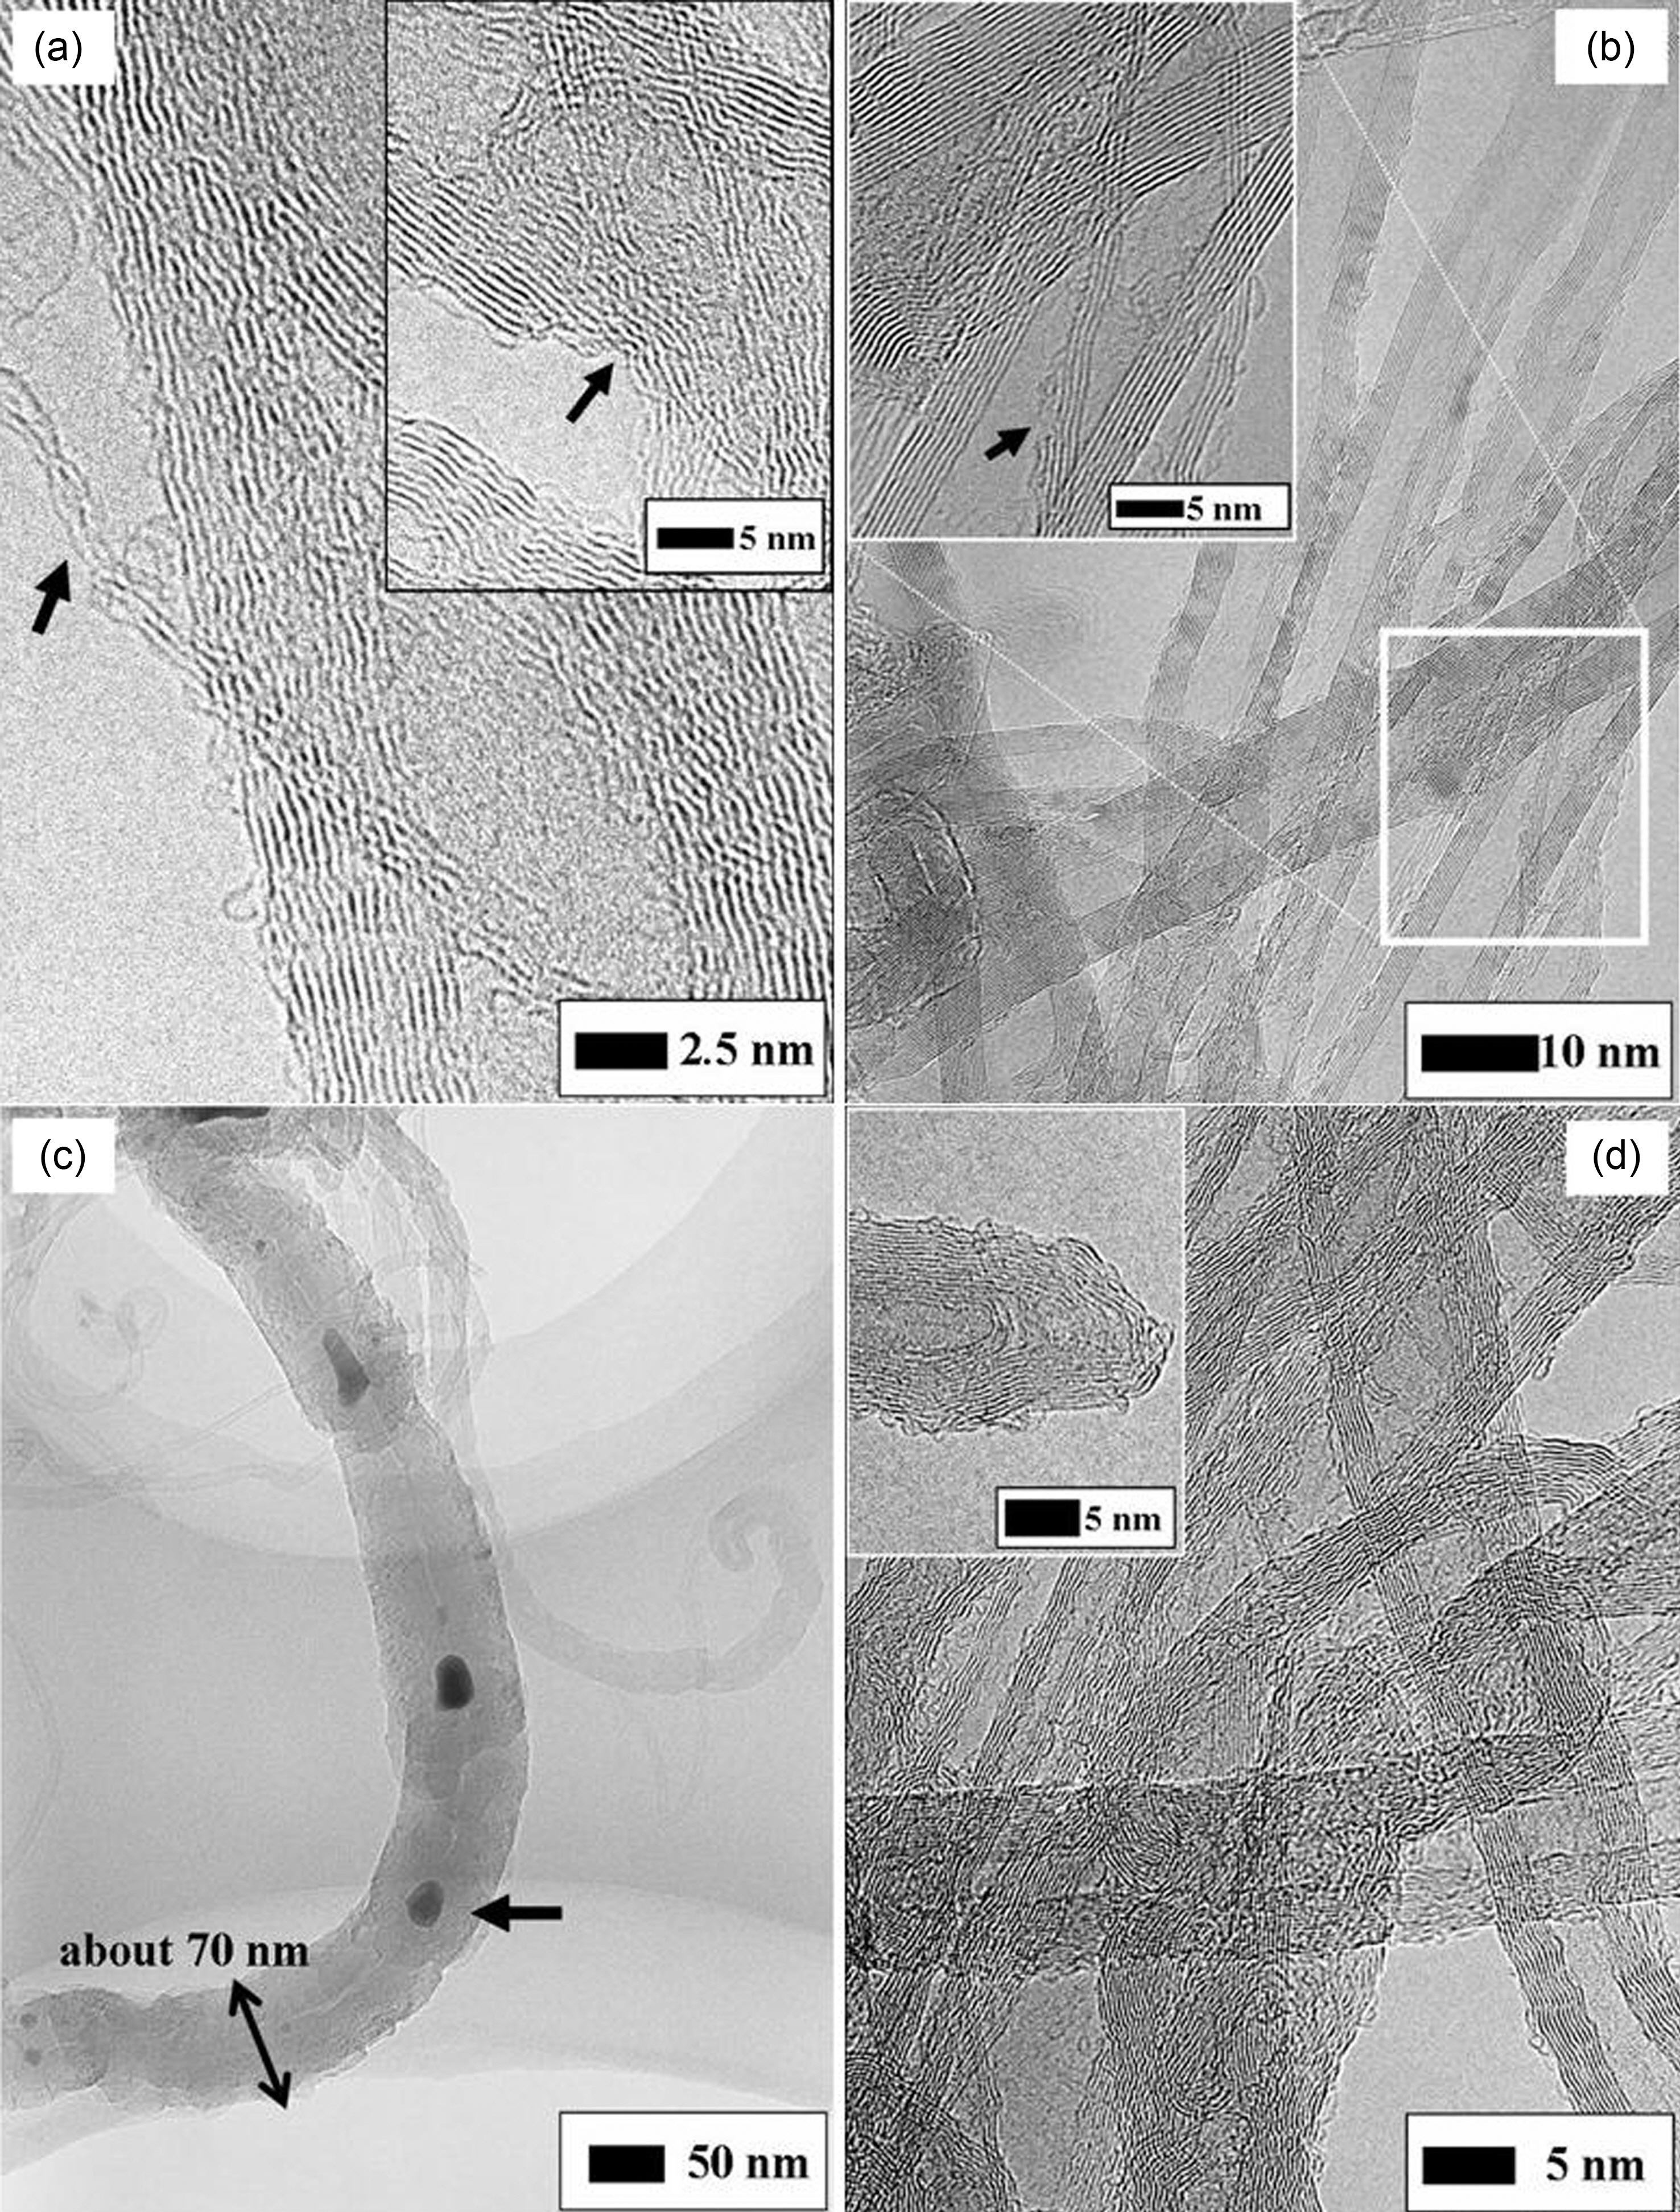 HRTEM images of the MWNT oxidized under several conditions represented in Table 1; (a) N1 are thinned and locally damaged (b) N3 retain intrinsic geometry (c) M1 is completely ruptured and (d) M2 are partially stripped-off.